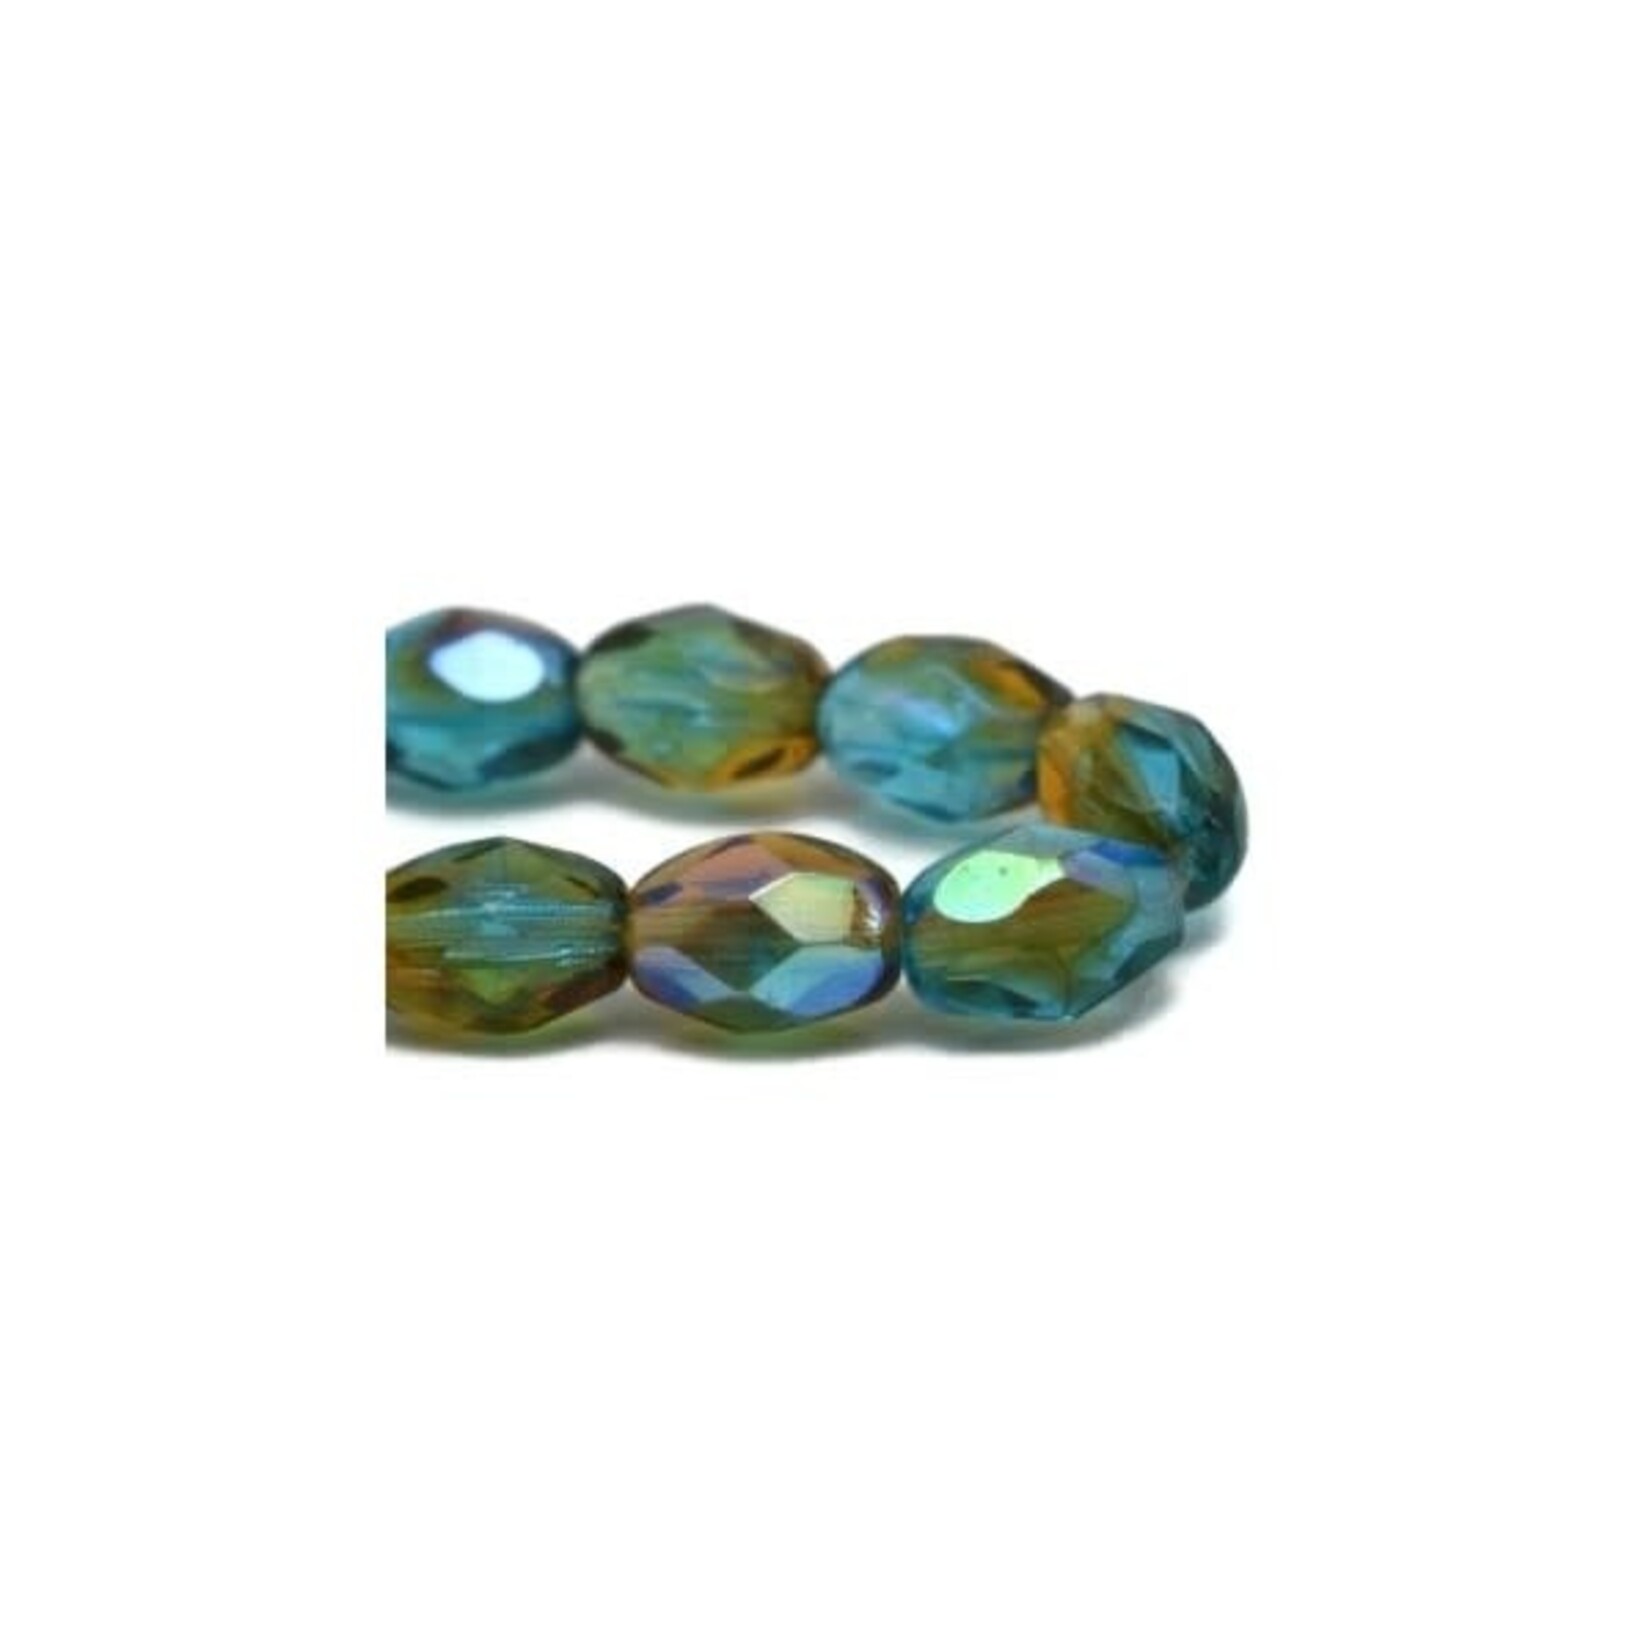 Czech Glass Faceted Oval 7x5mm Teal Yellow Green AB Bead Strand